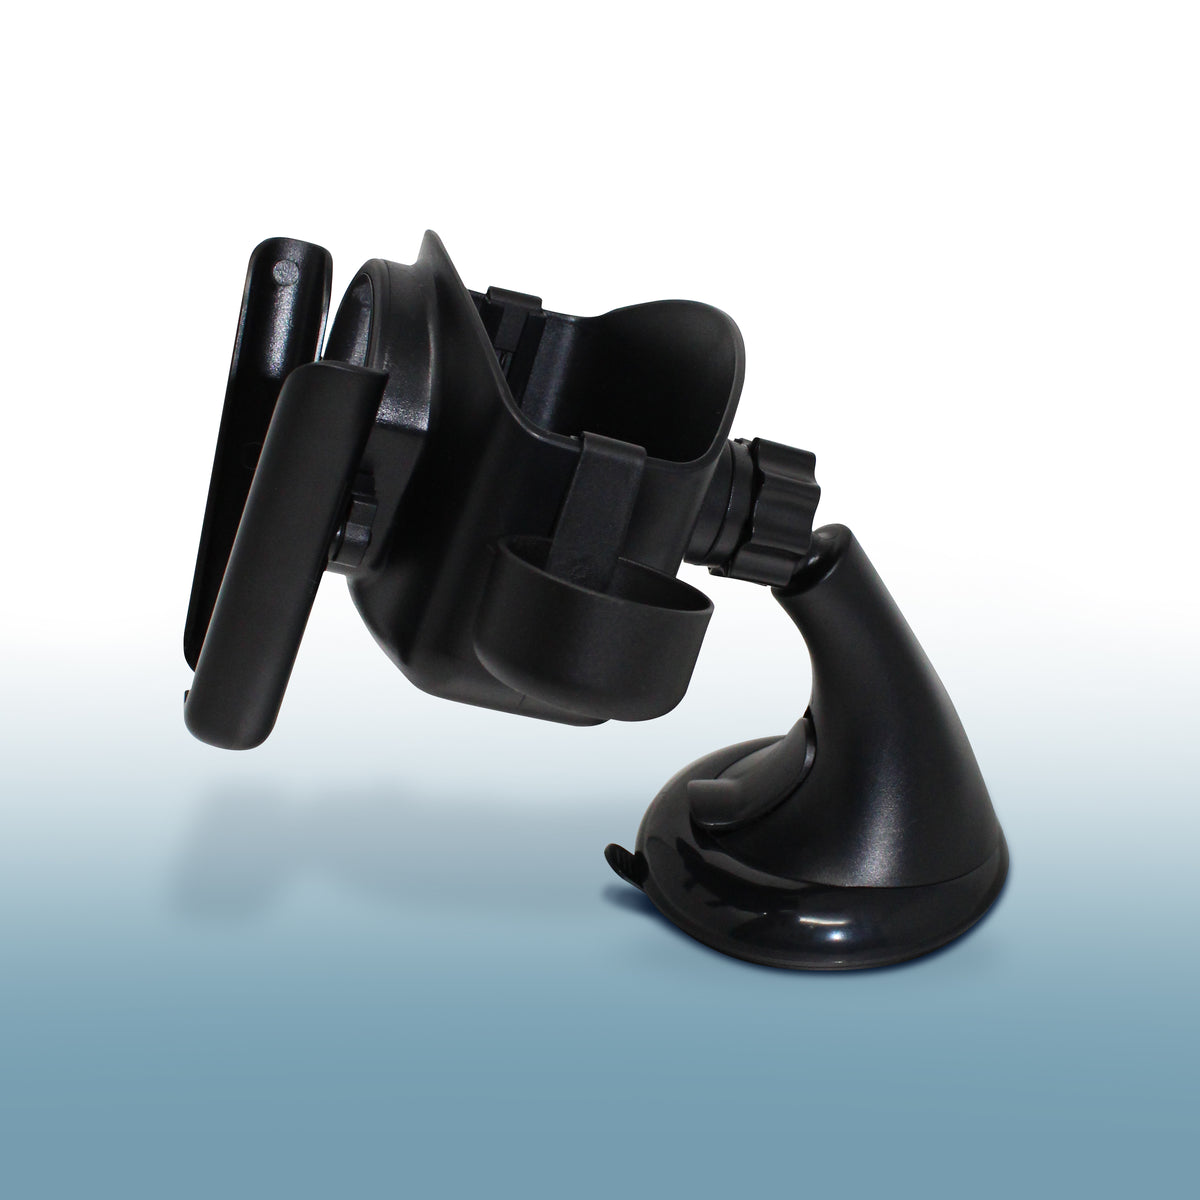 Tech Theory Phone and Food Universal Car Mount Aduro Products Now is the  moment to place an order and get a bonus